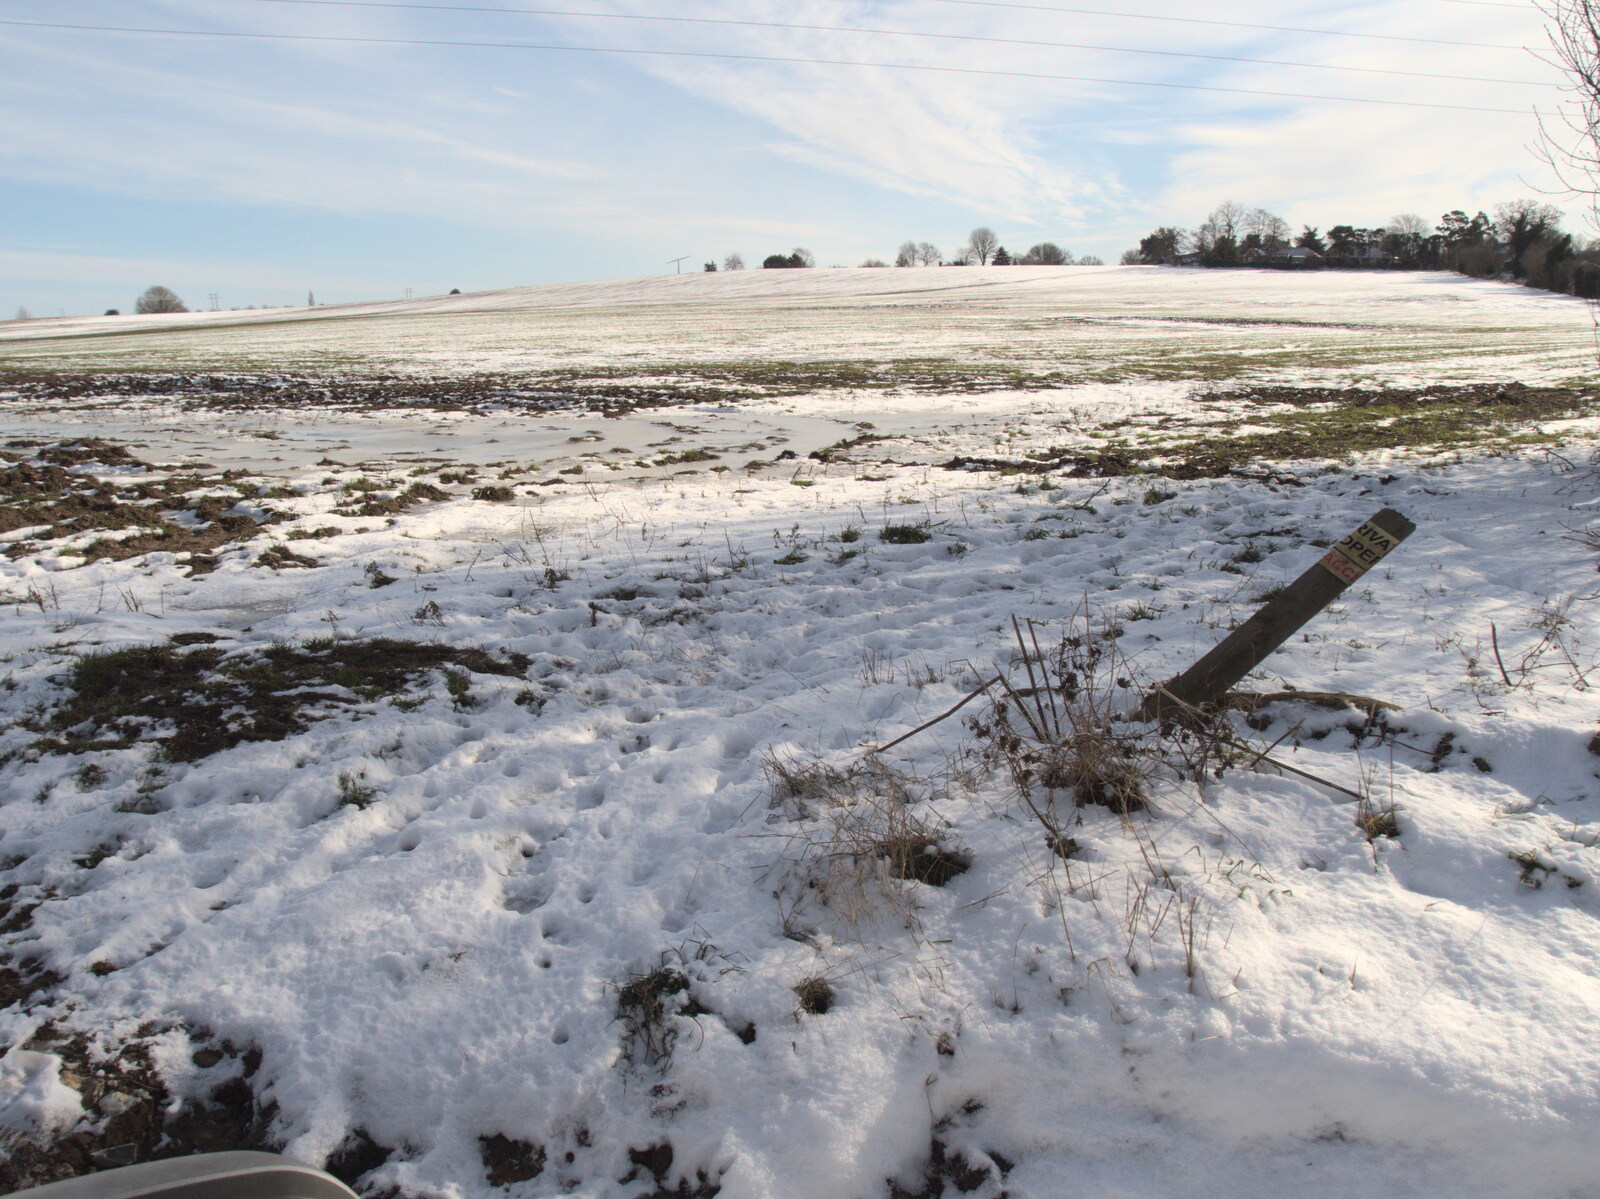 A snowy field on Denmark Hill from Derelict Infants School and Ice Sculptures, Diss and Palgrave, Norfolk and Suffolk - 13th February 2021